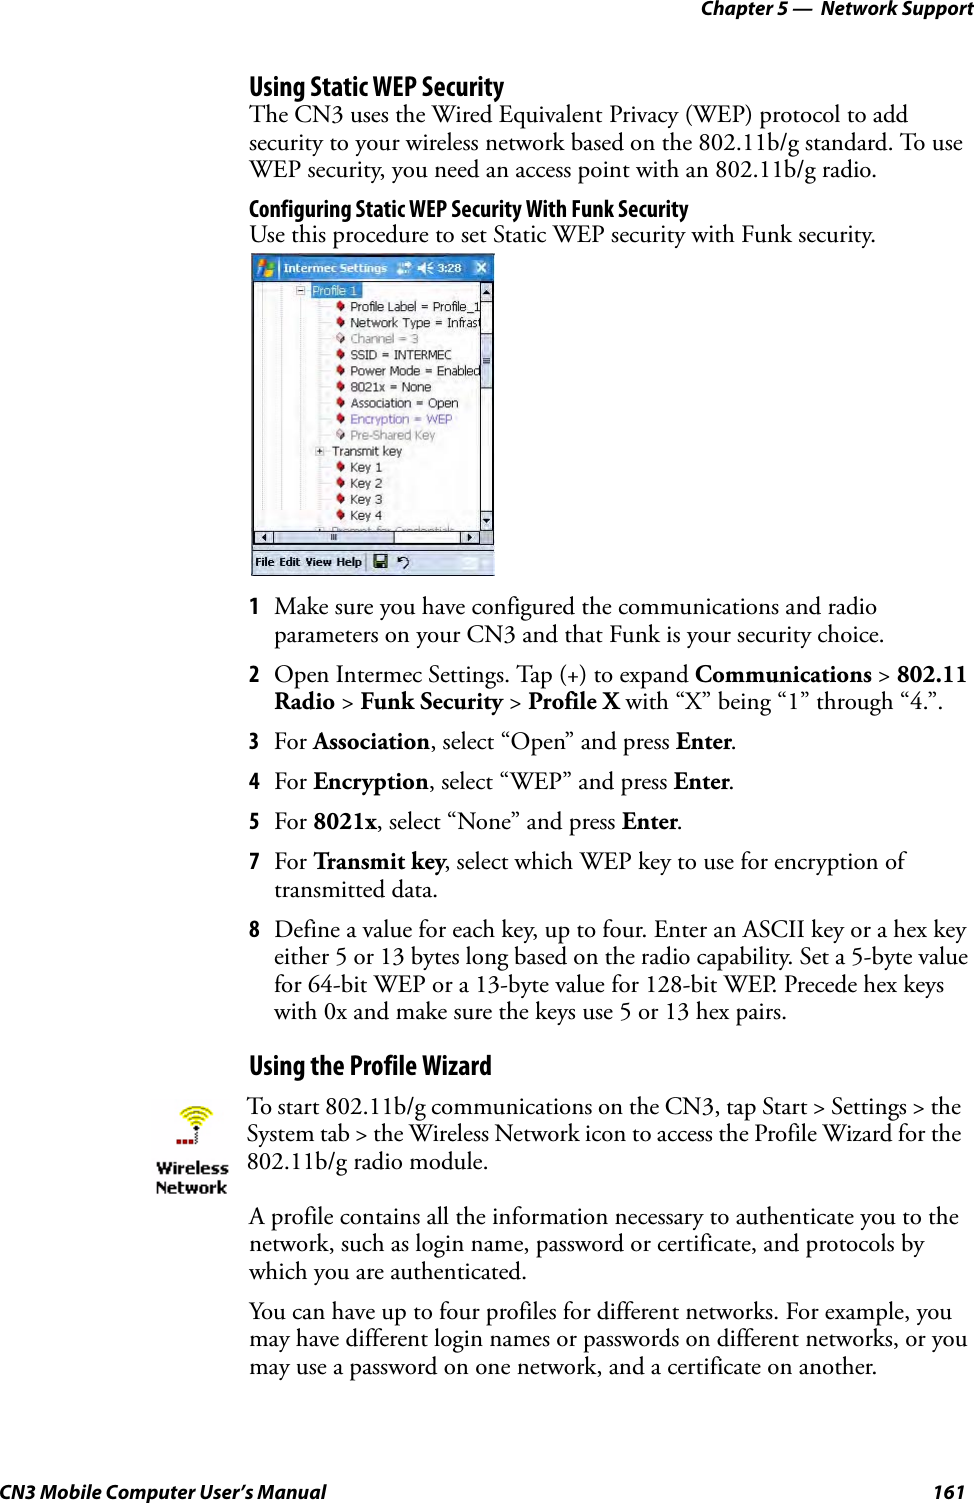 Chapter 5 —  Network SupportCN3 Mobile Computer User’s Manual 161Using Static WEP SecurityThe CN3 uses the Wired Equivalent Privacy (WEP) protocol to add security to your wireless network based on the 802.11b/g standard. To use WEP security, you need an access point with an 802.11b/g radio.Configuring Static WEP Security With Funk SecurityUse this procedure to set Static WEP security with Funk security.1Make sure you have configured the communications and radio parameters on your CN3 and that Funk is your security choice.2Open Intermec Settings. Tap (+) to expand Communications &gt; 802.11 Radio &gt; Funk Security &gt; Profile X with “X” being “1” through “4.”.3For Association, select “Open” and press Enter. 4For Encryption, select “WEP” and press Enter.5For 8021x, select “None” and press Enter.7For Tr a n sm it key, select which WEP key to use for encryption of transmitted data.8Define a value for each key, up to four. Enter an ASCII key or a hex key either 5 or 13 bytes long based on the radio capability. Set a 5-byte value for 64-bit WEP or a 13-byte value for 128-bit WEP. Precede hex keys with 0x and make sure the keys use 5 or 13 hex pairs.Using the Profile WizardA profile contains all the information necessary to authenticate you to the network, such as login name, password or certificate, and protocols by which you are authenticated.You can have up to four profiles for different networks. For example, you may have different login names or passwords on different networks, or you may use a password on one network, and a certificate on another.To start 802.11b/g communications on the CN3, tap Start &gt; Settings &gt; the System tab &gt; the Wireless Network icon to access the Profile Wizard for the 802.11b/g radio module.